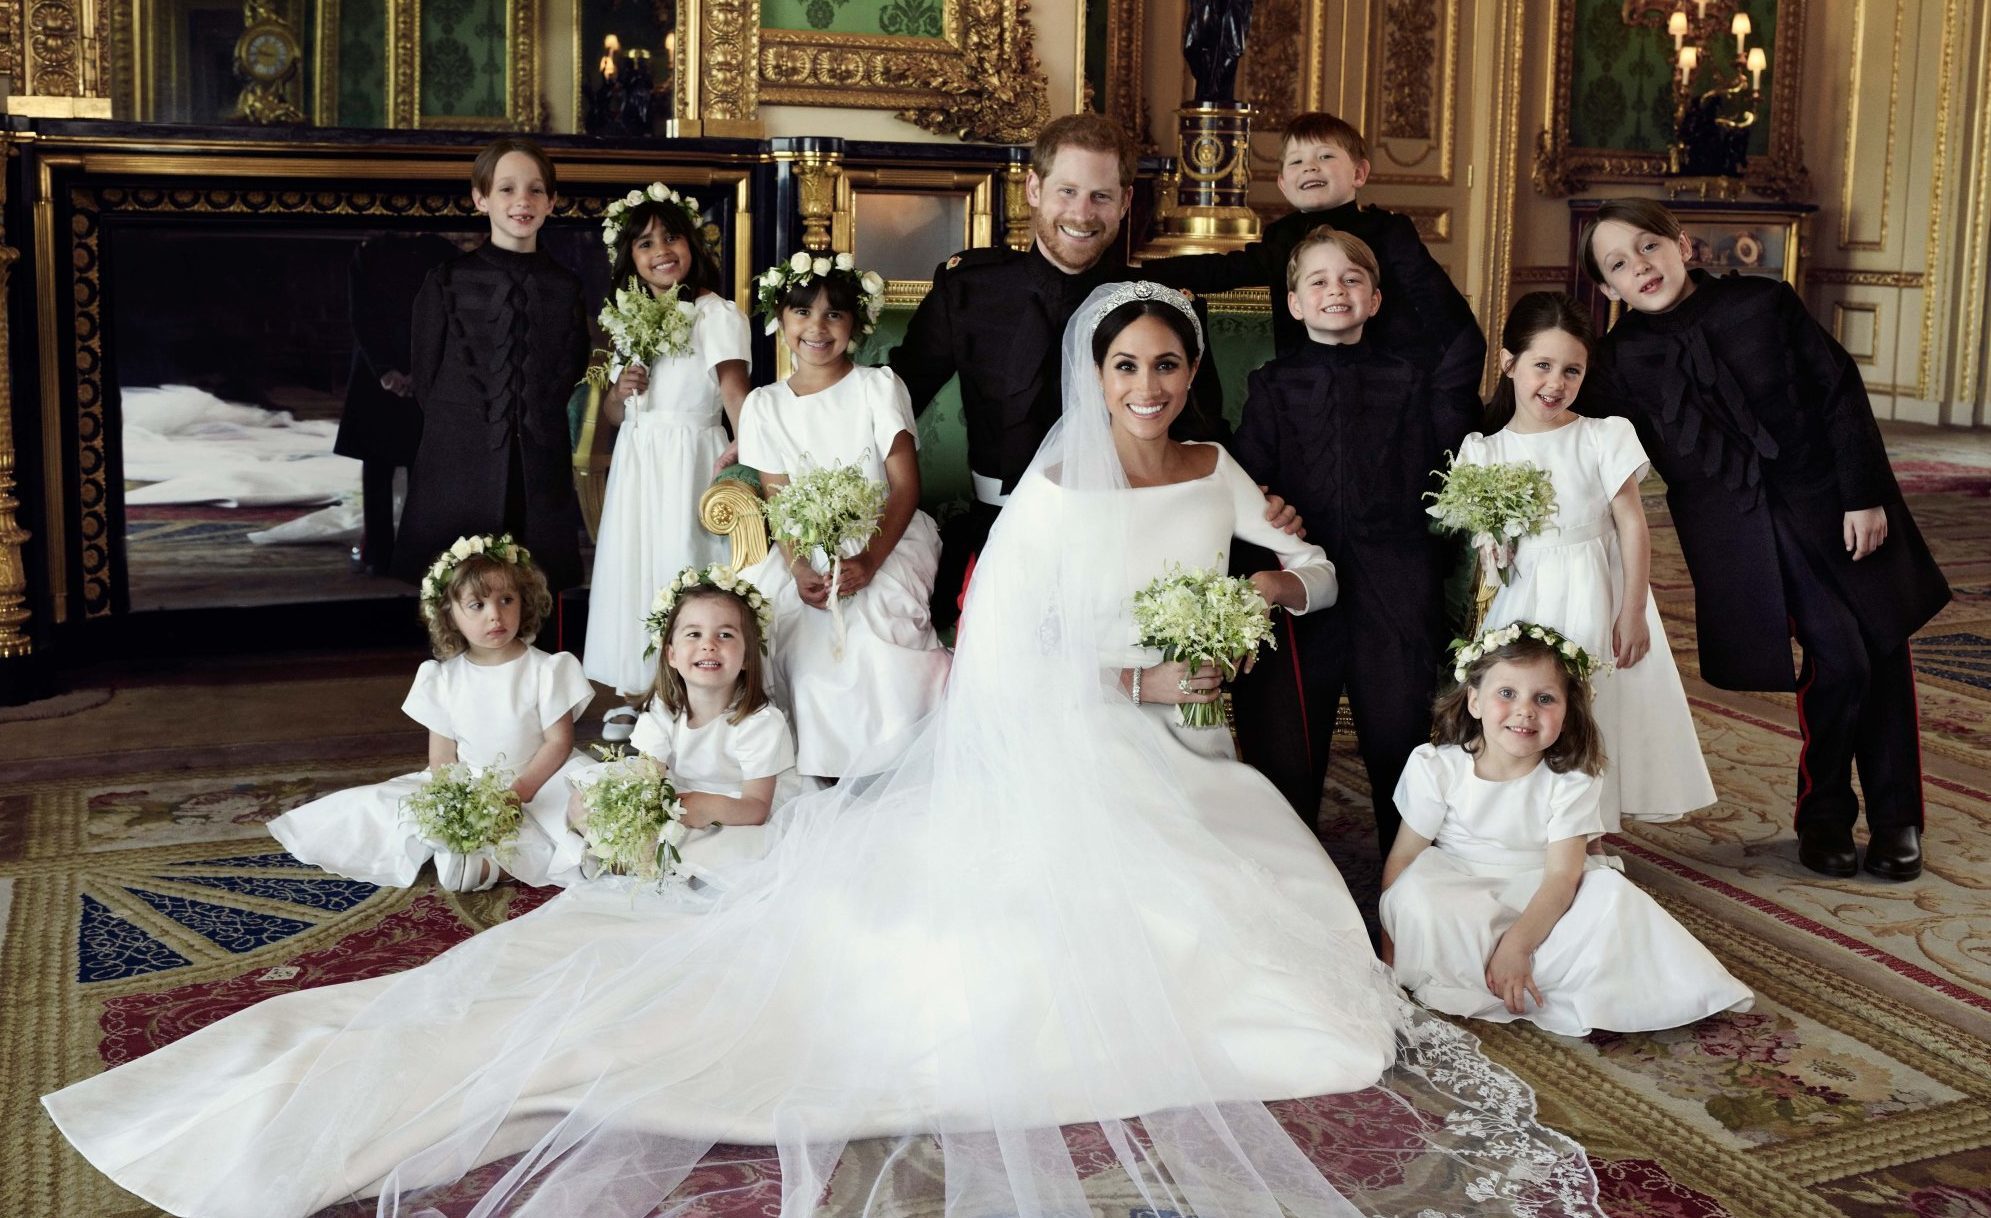 Prince Harry and Meghan Markle surrounded by bridesmaids and page boys after their wedding.